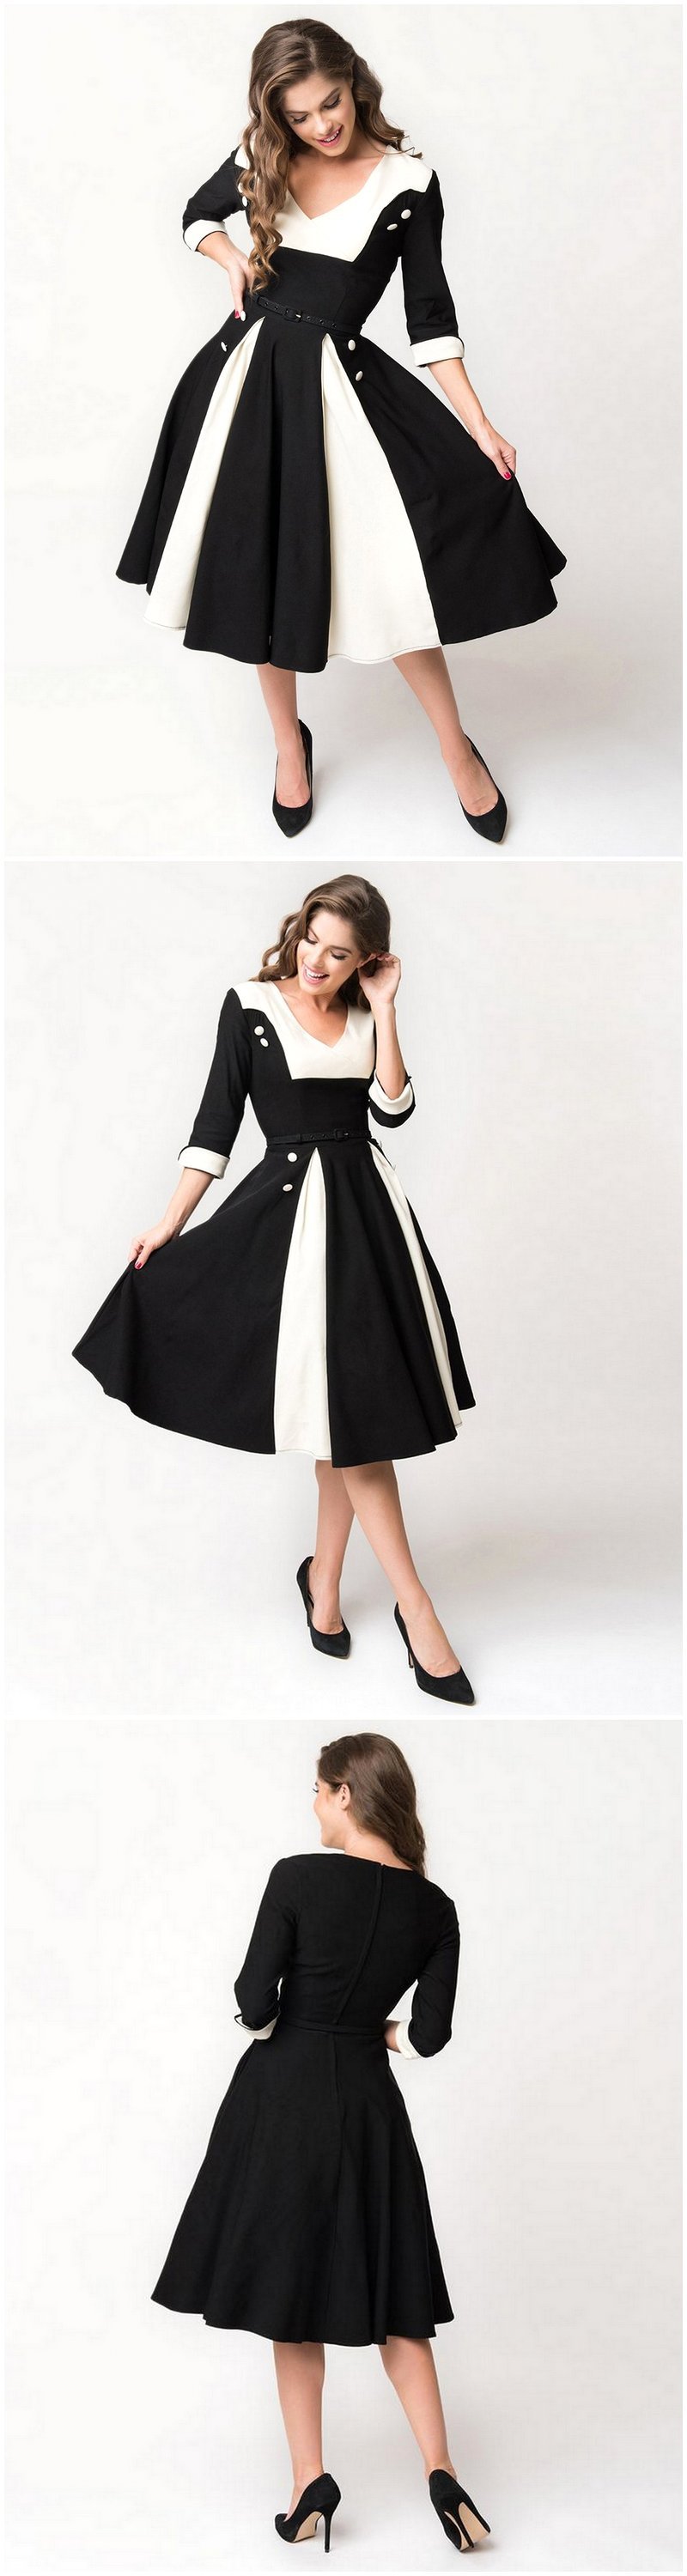 Retro Style Vintage Inspired Clothing for Women